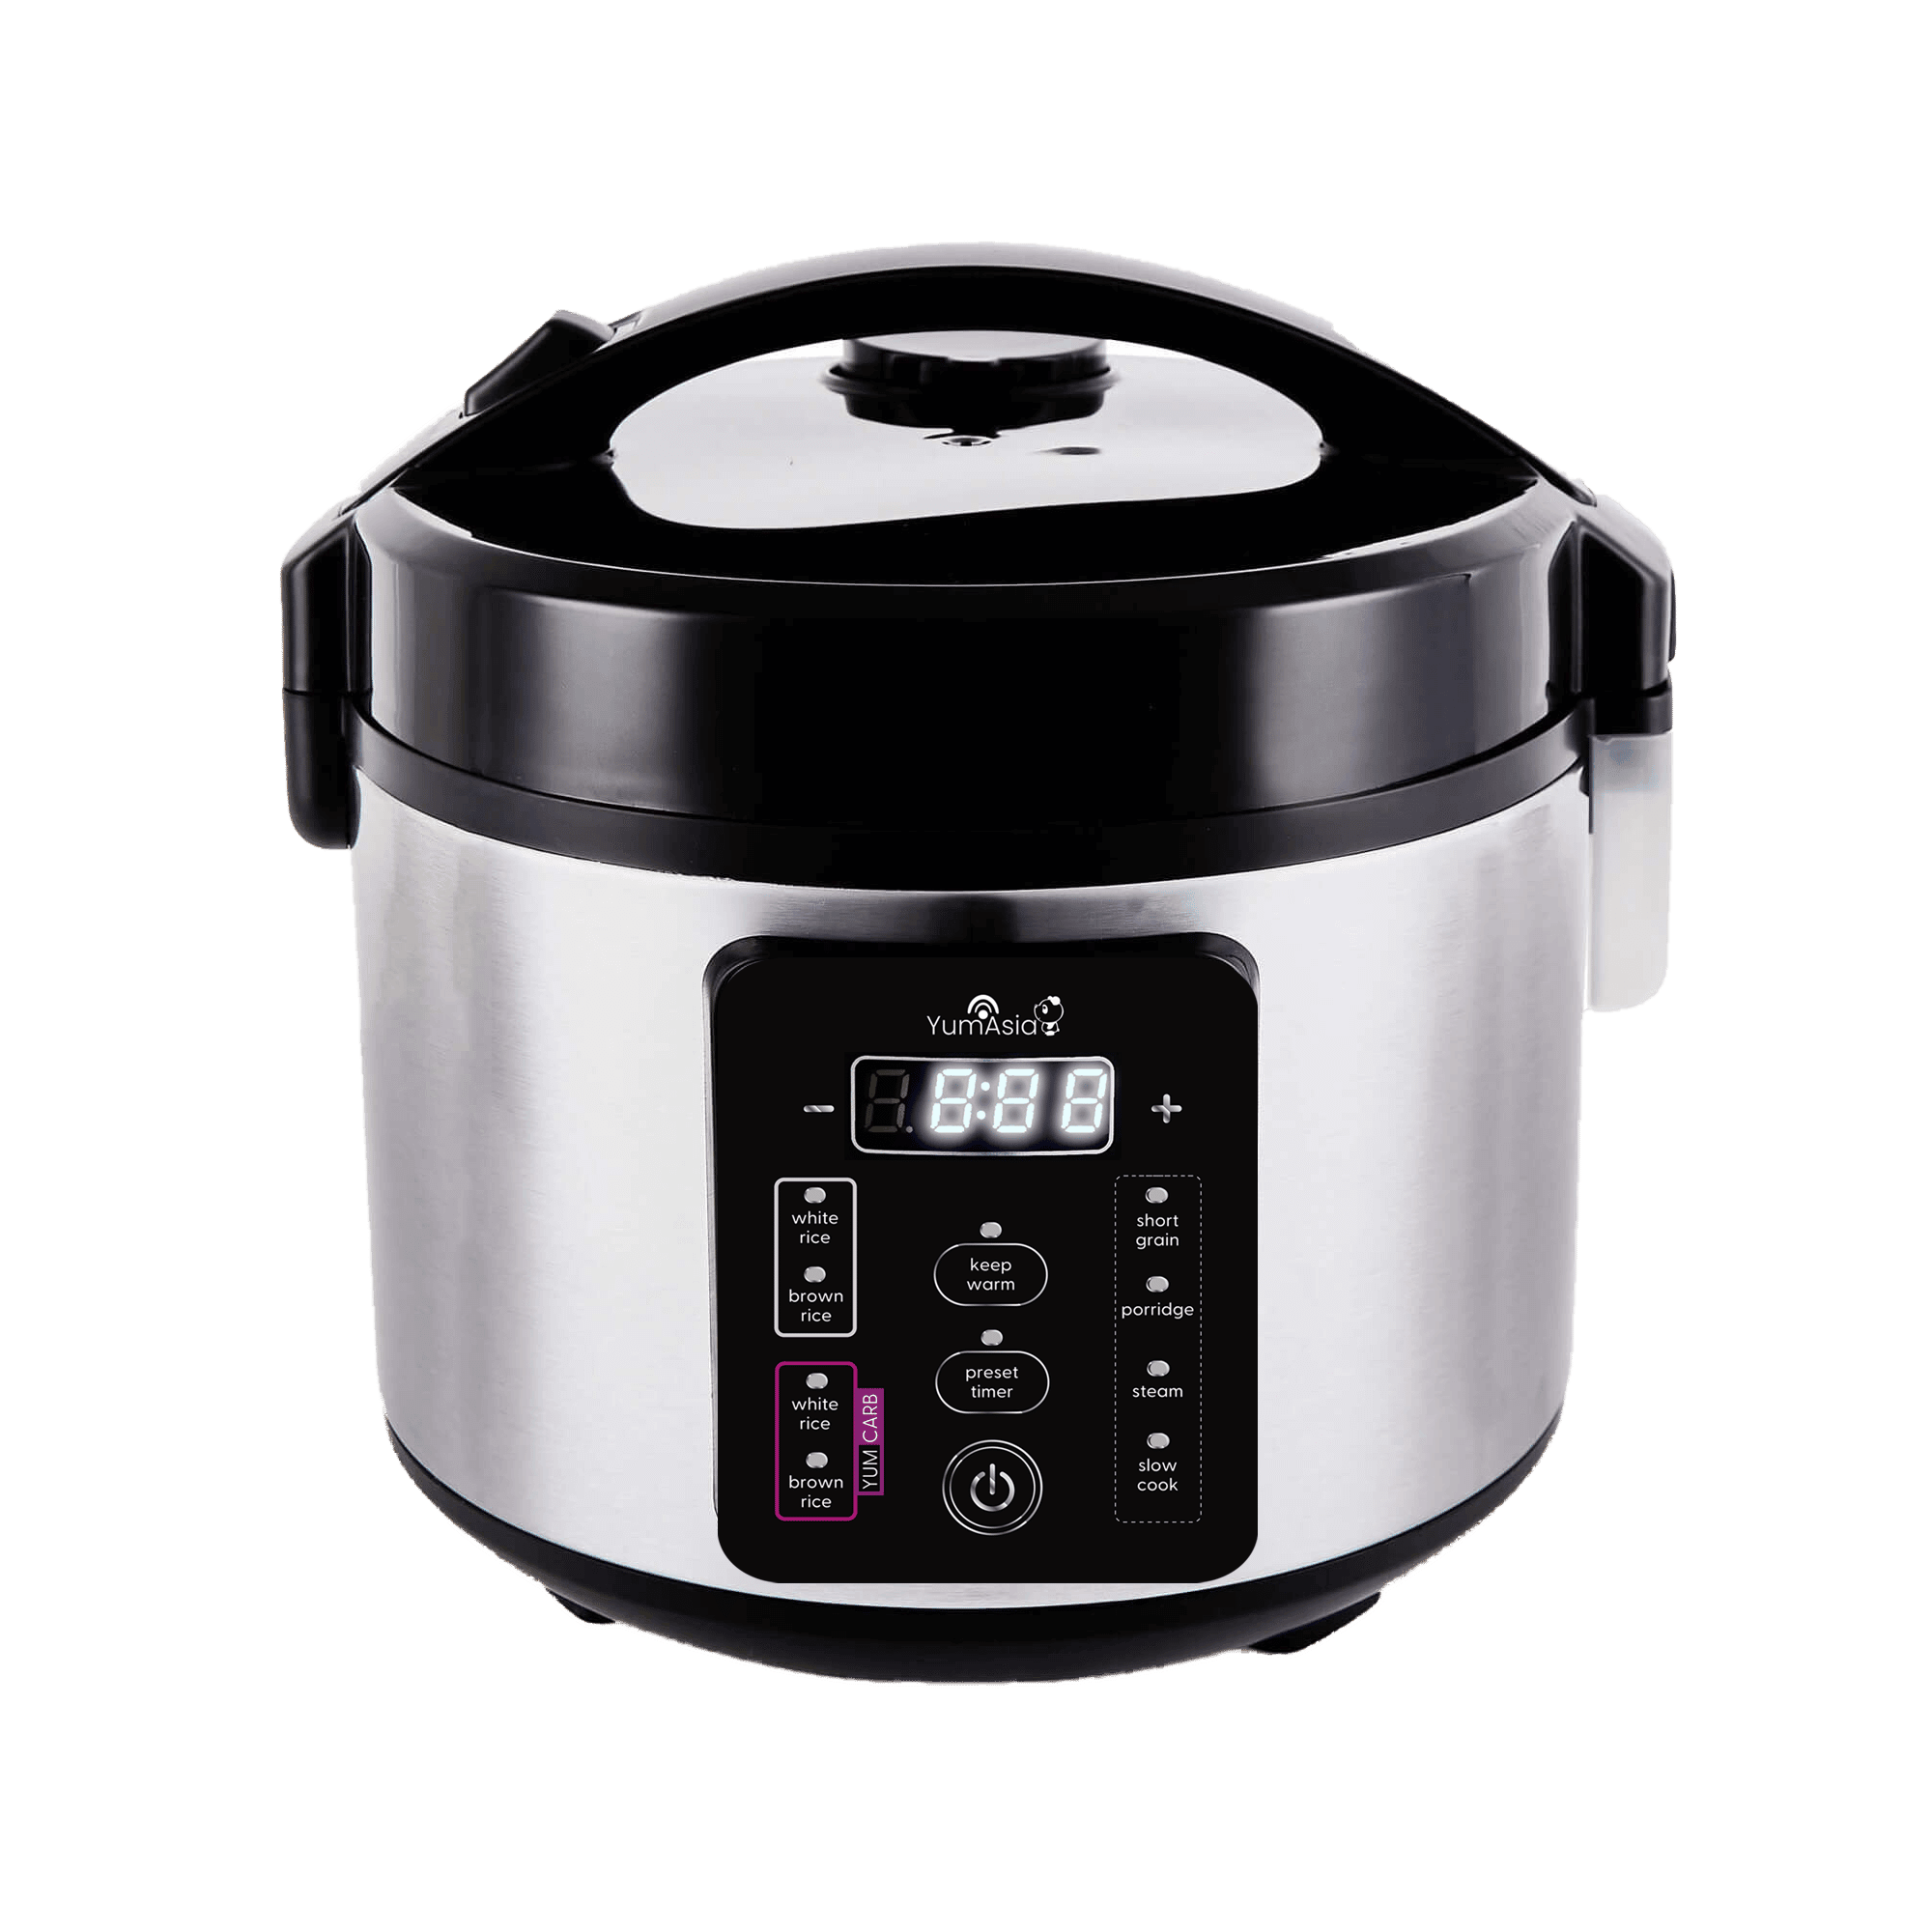 Carb Reduction Rice Cookers : Low Carb Rice Cooker